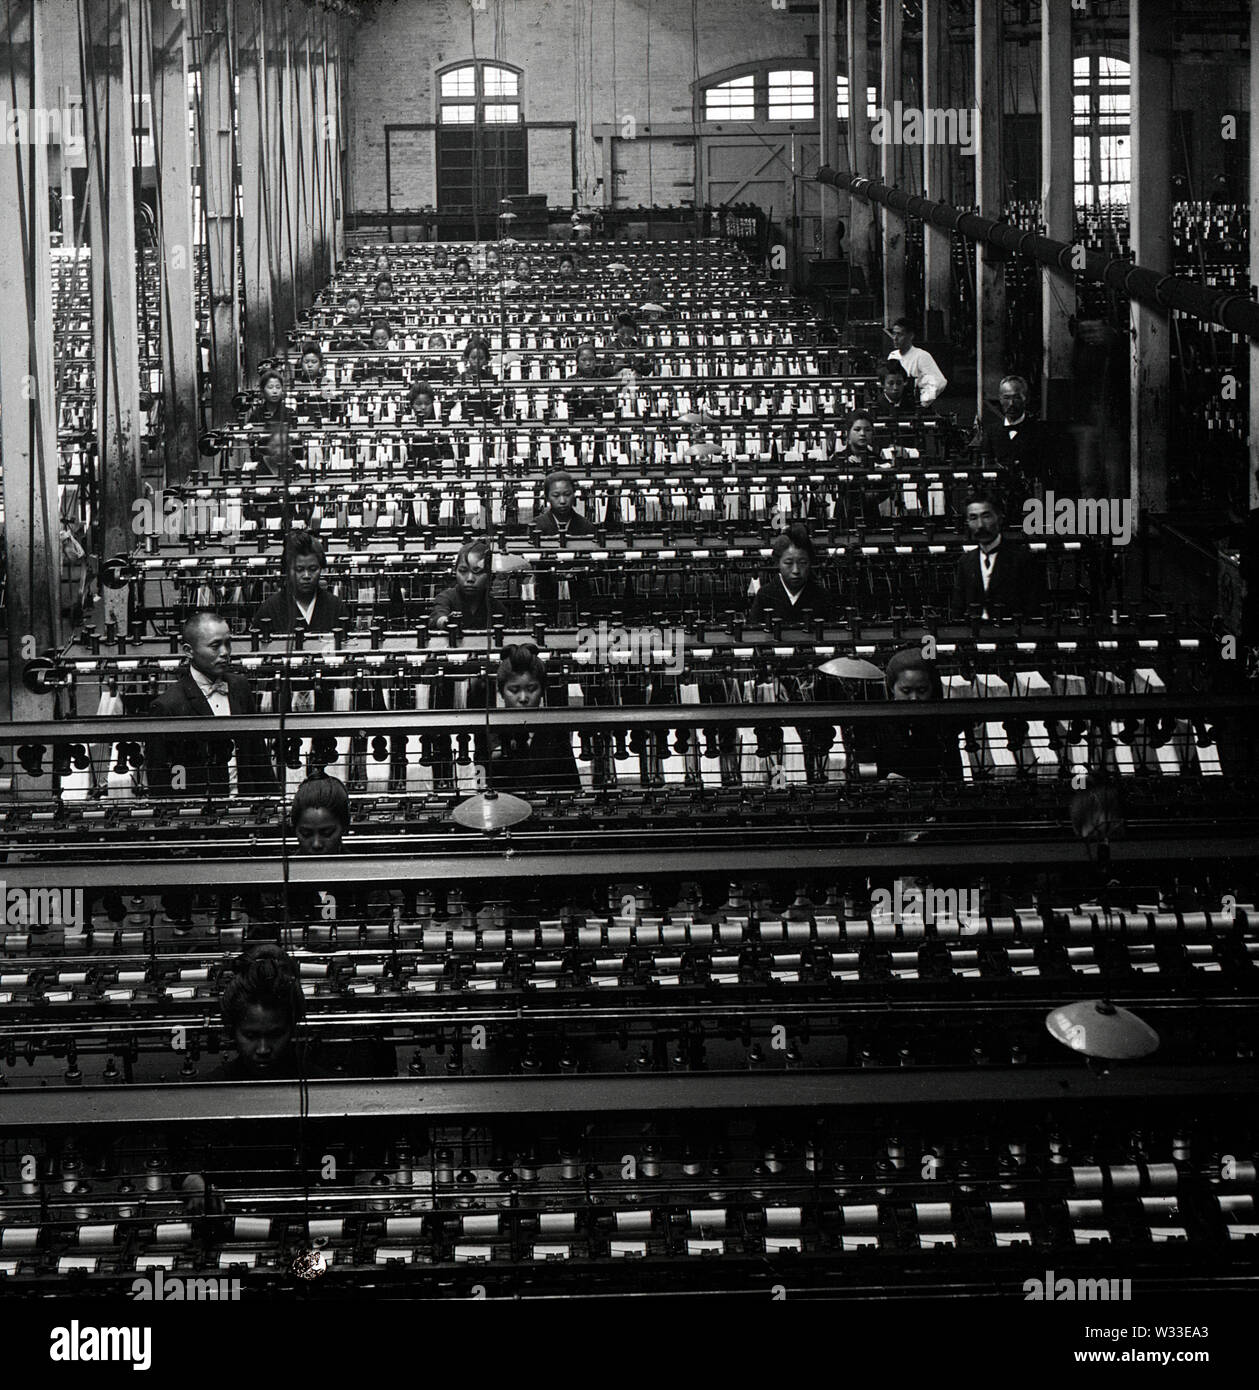 [ 1900s Japan - Japanese Silk Factory ] —   The spindle room at the Kiryu Orimono KK (Kiryu Textile Company Ltd.), a Japanese silk factory in Kiryu, Gunma Prefecture. The company was launched as the Nihon Orimono KK (Japan Textile Company, Ltd.) in 1887 (Meiji 20). At the time it was Japan's largest and most modern silk factory where the complete production process was done by machinery.  20th century vintage glass slide. Stock Photo